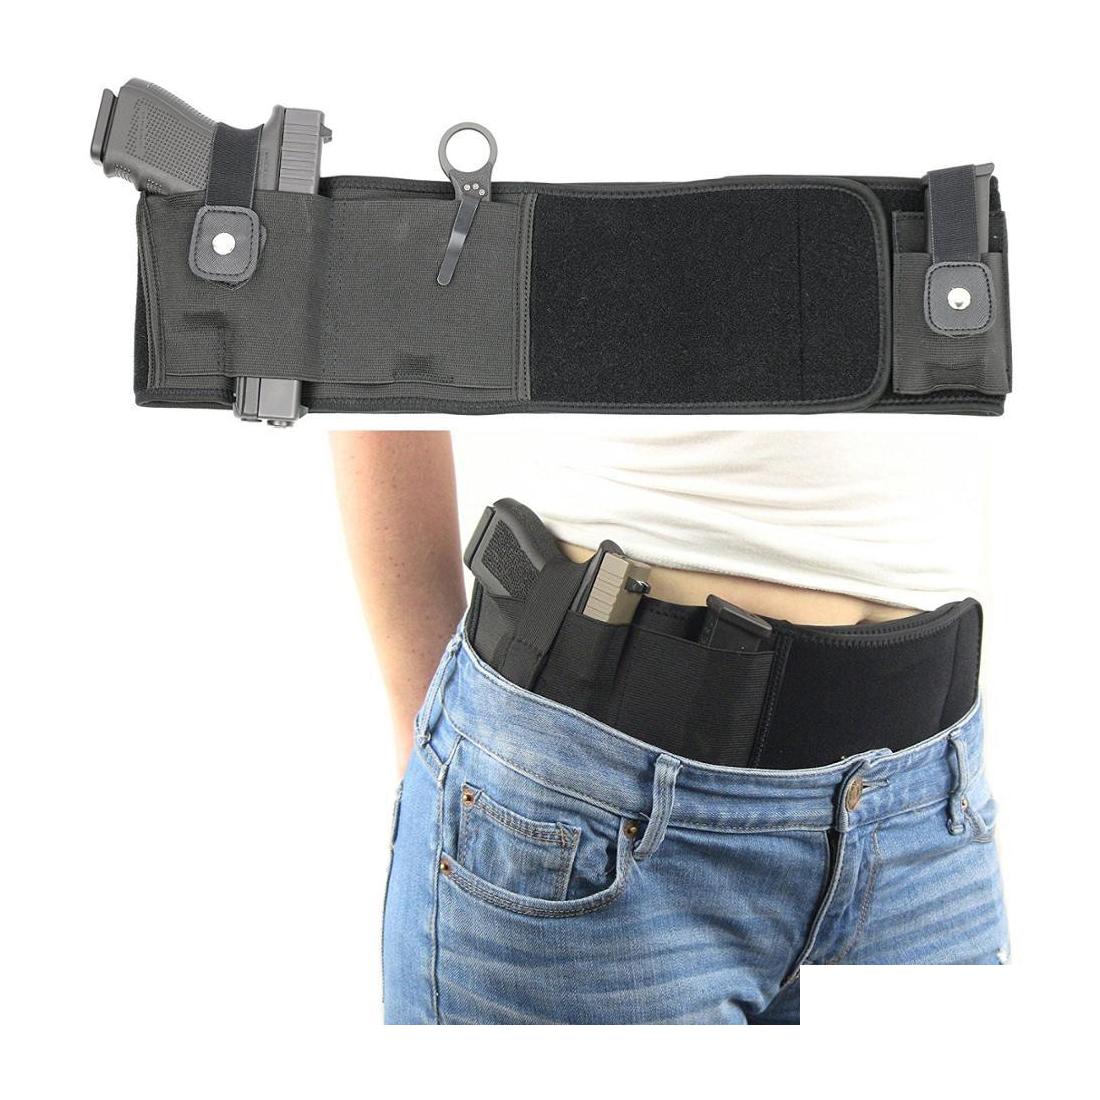 

Tactical Accessories Timate Belly Band Iwb Gun Holster For Concealed Carry Adjustable Waist Pistol Right Hand Left D Drop Delivery S Dhjov